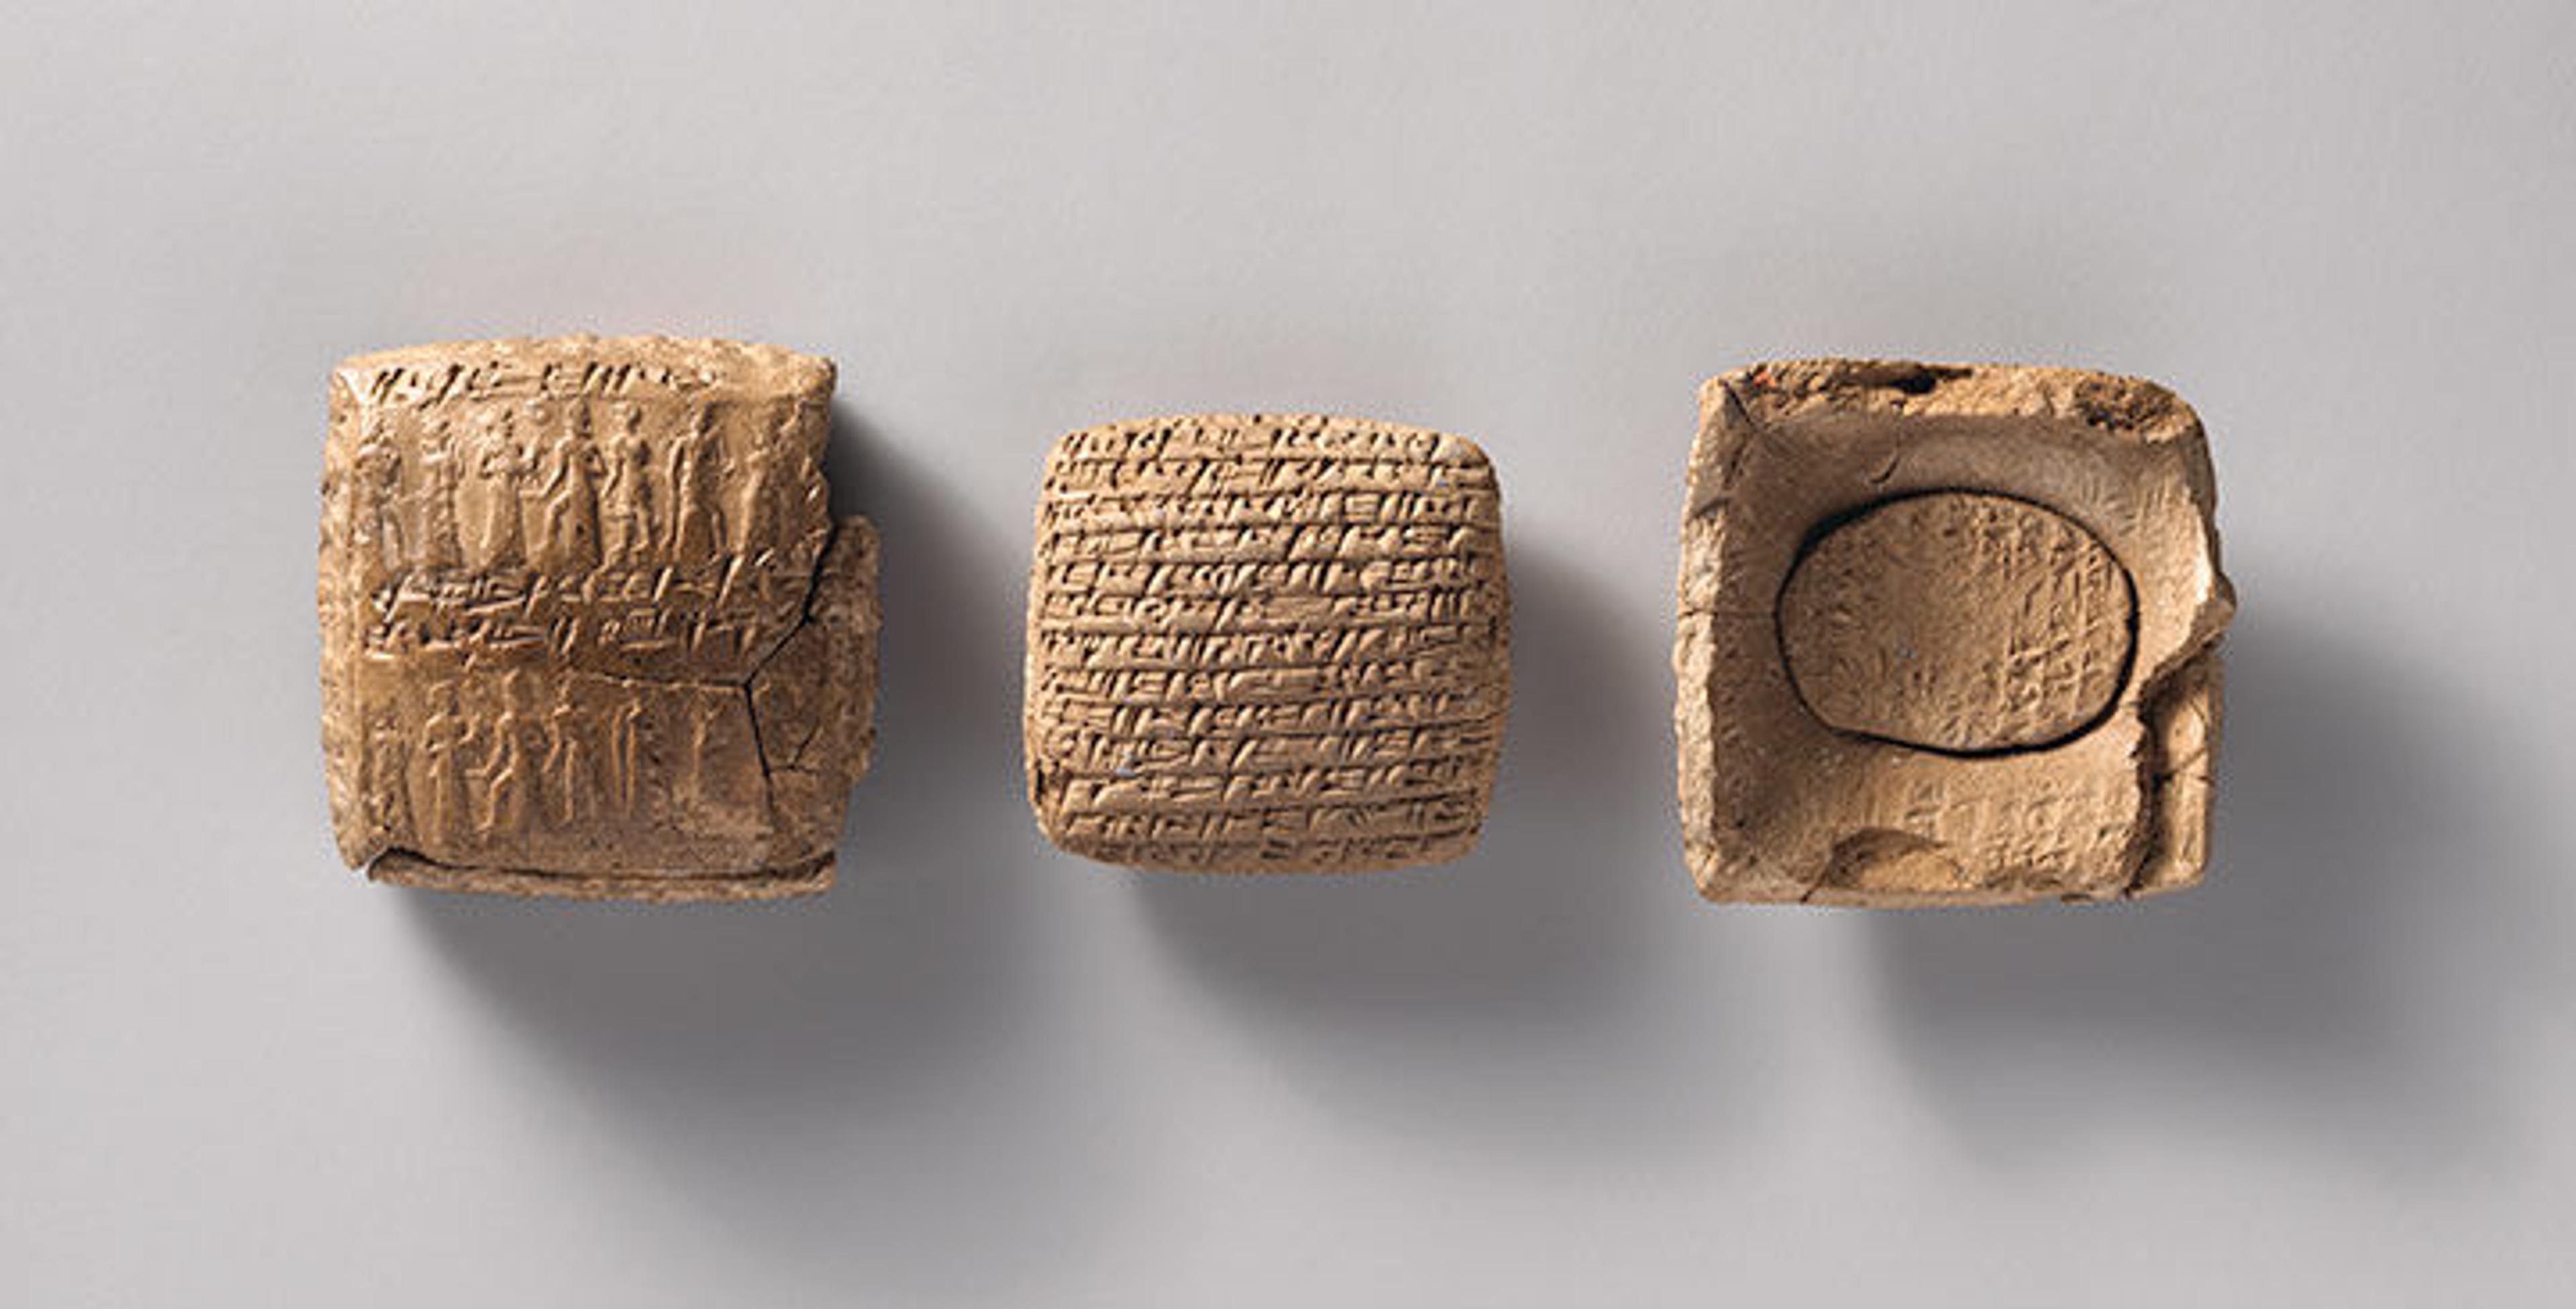 These cuneiform tablets are a letter from an Assyrian merchant to his Anatolian wife